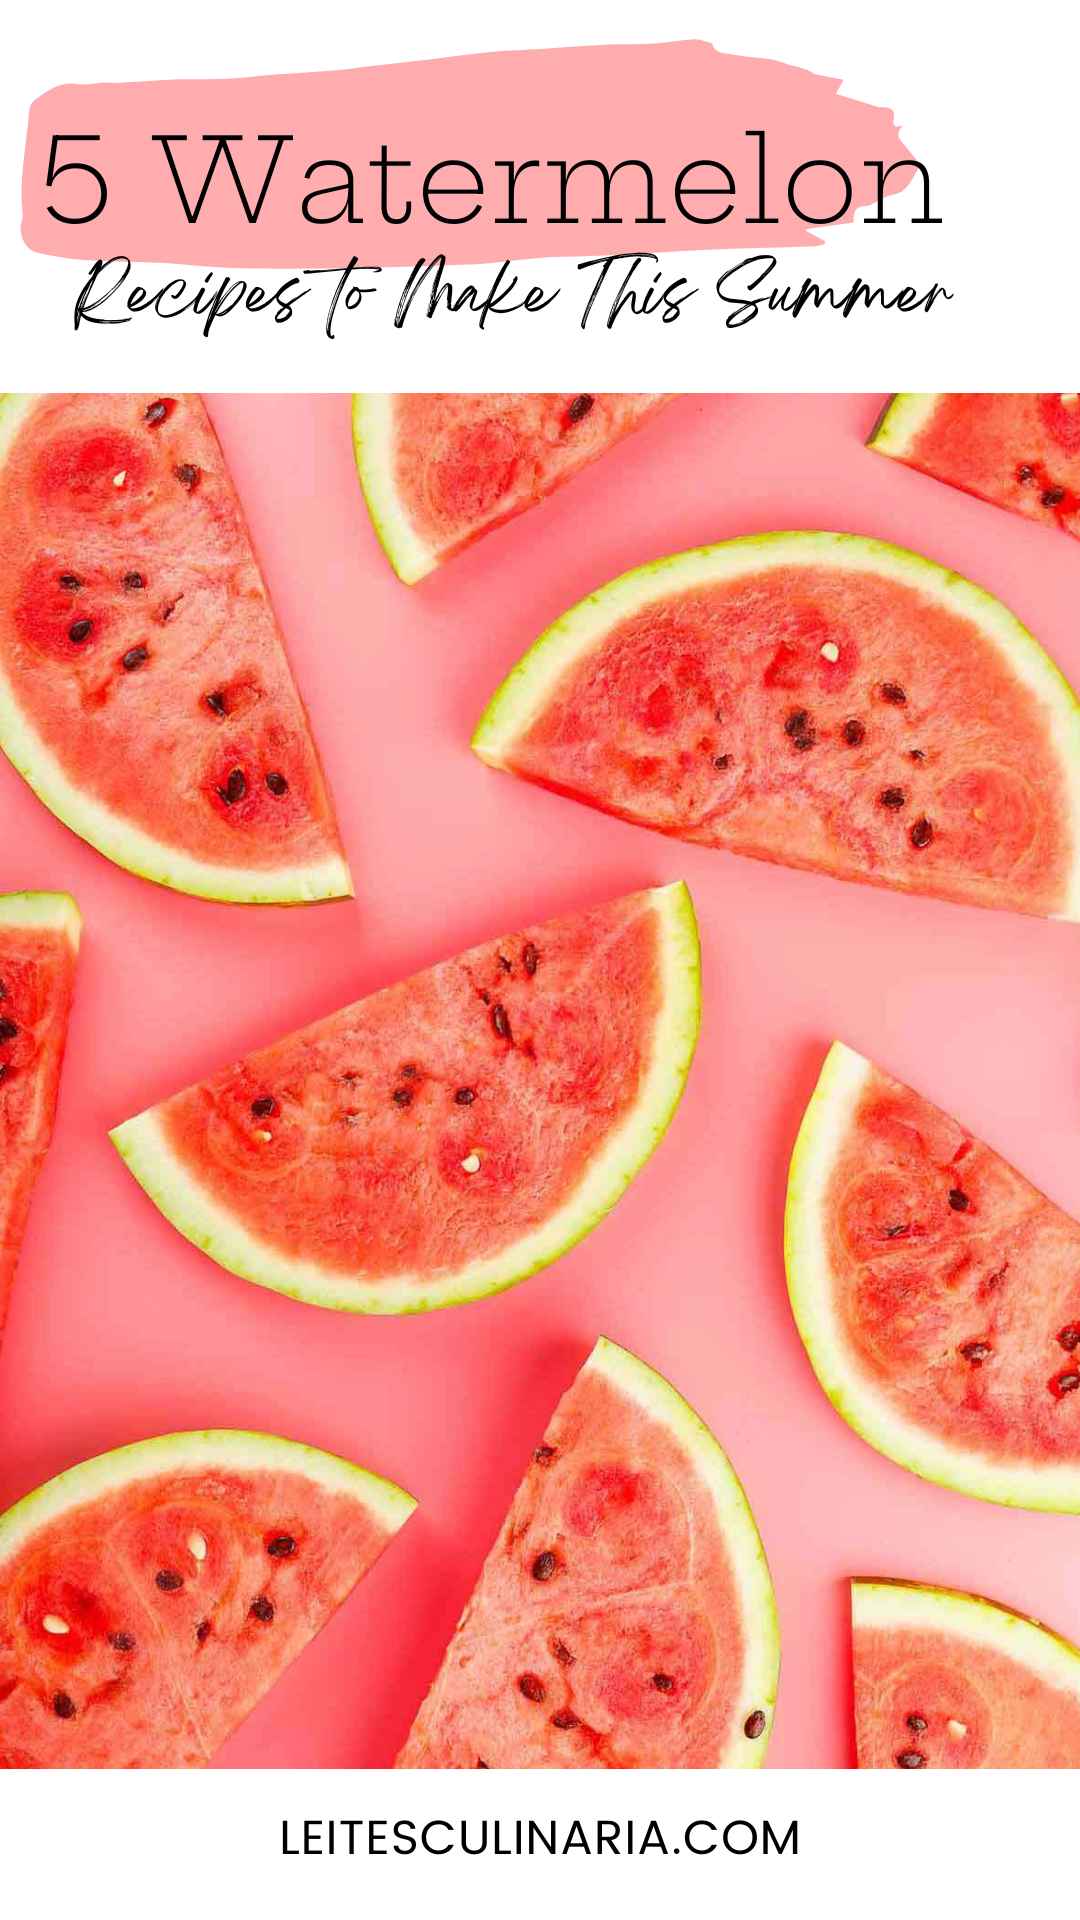 Half-moon slices of watermelon on a pink background.